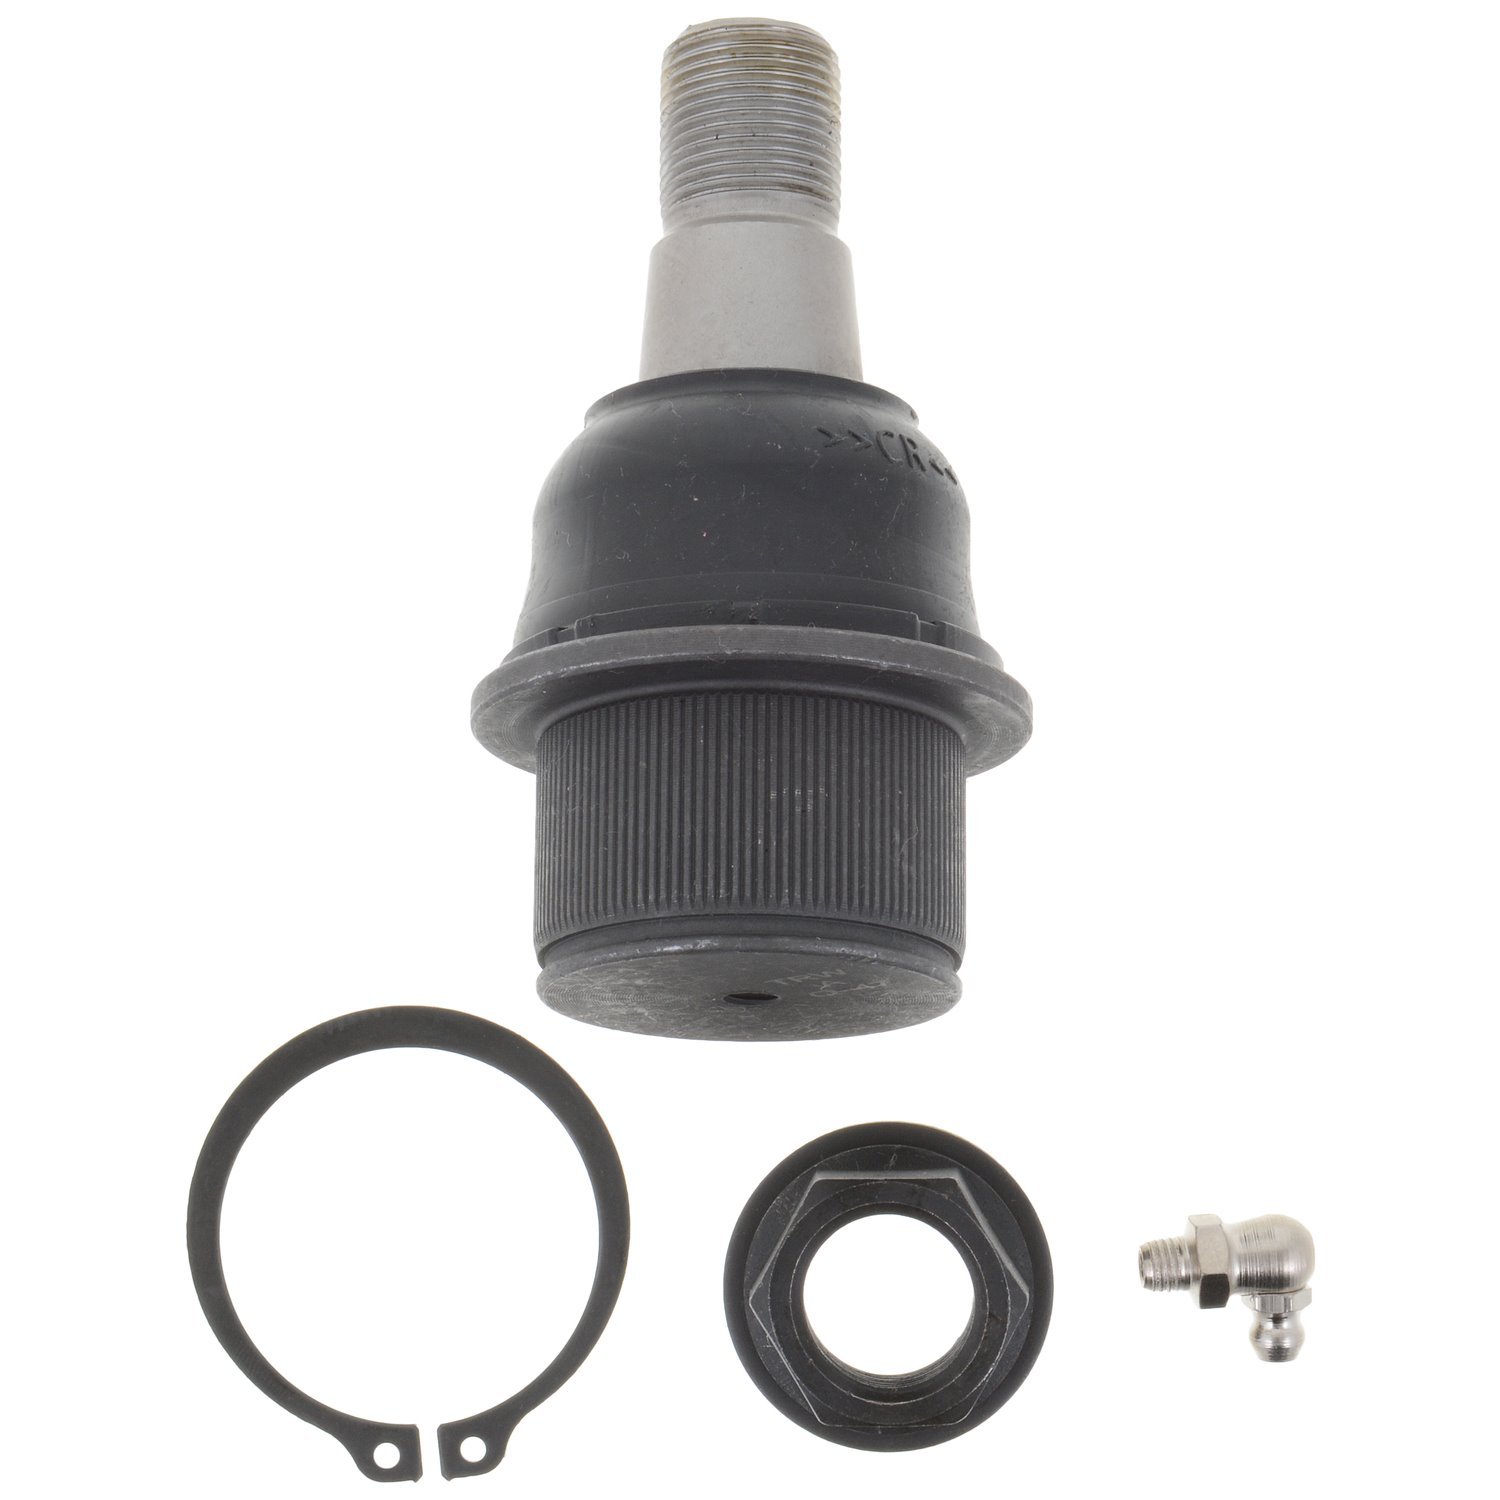 JBJ112 Ball Joint Fits Select Dodge Models, Position: Left/Driver or Right/Passenger, Front Lower